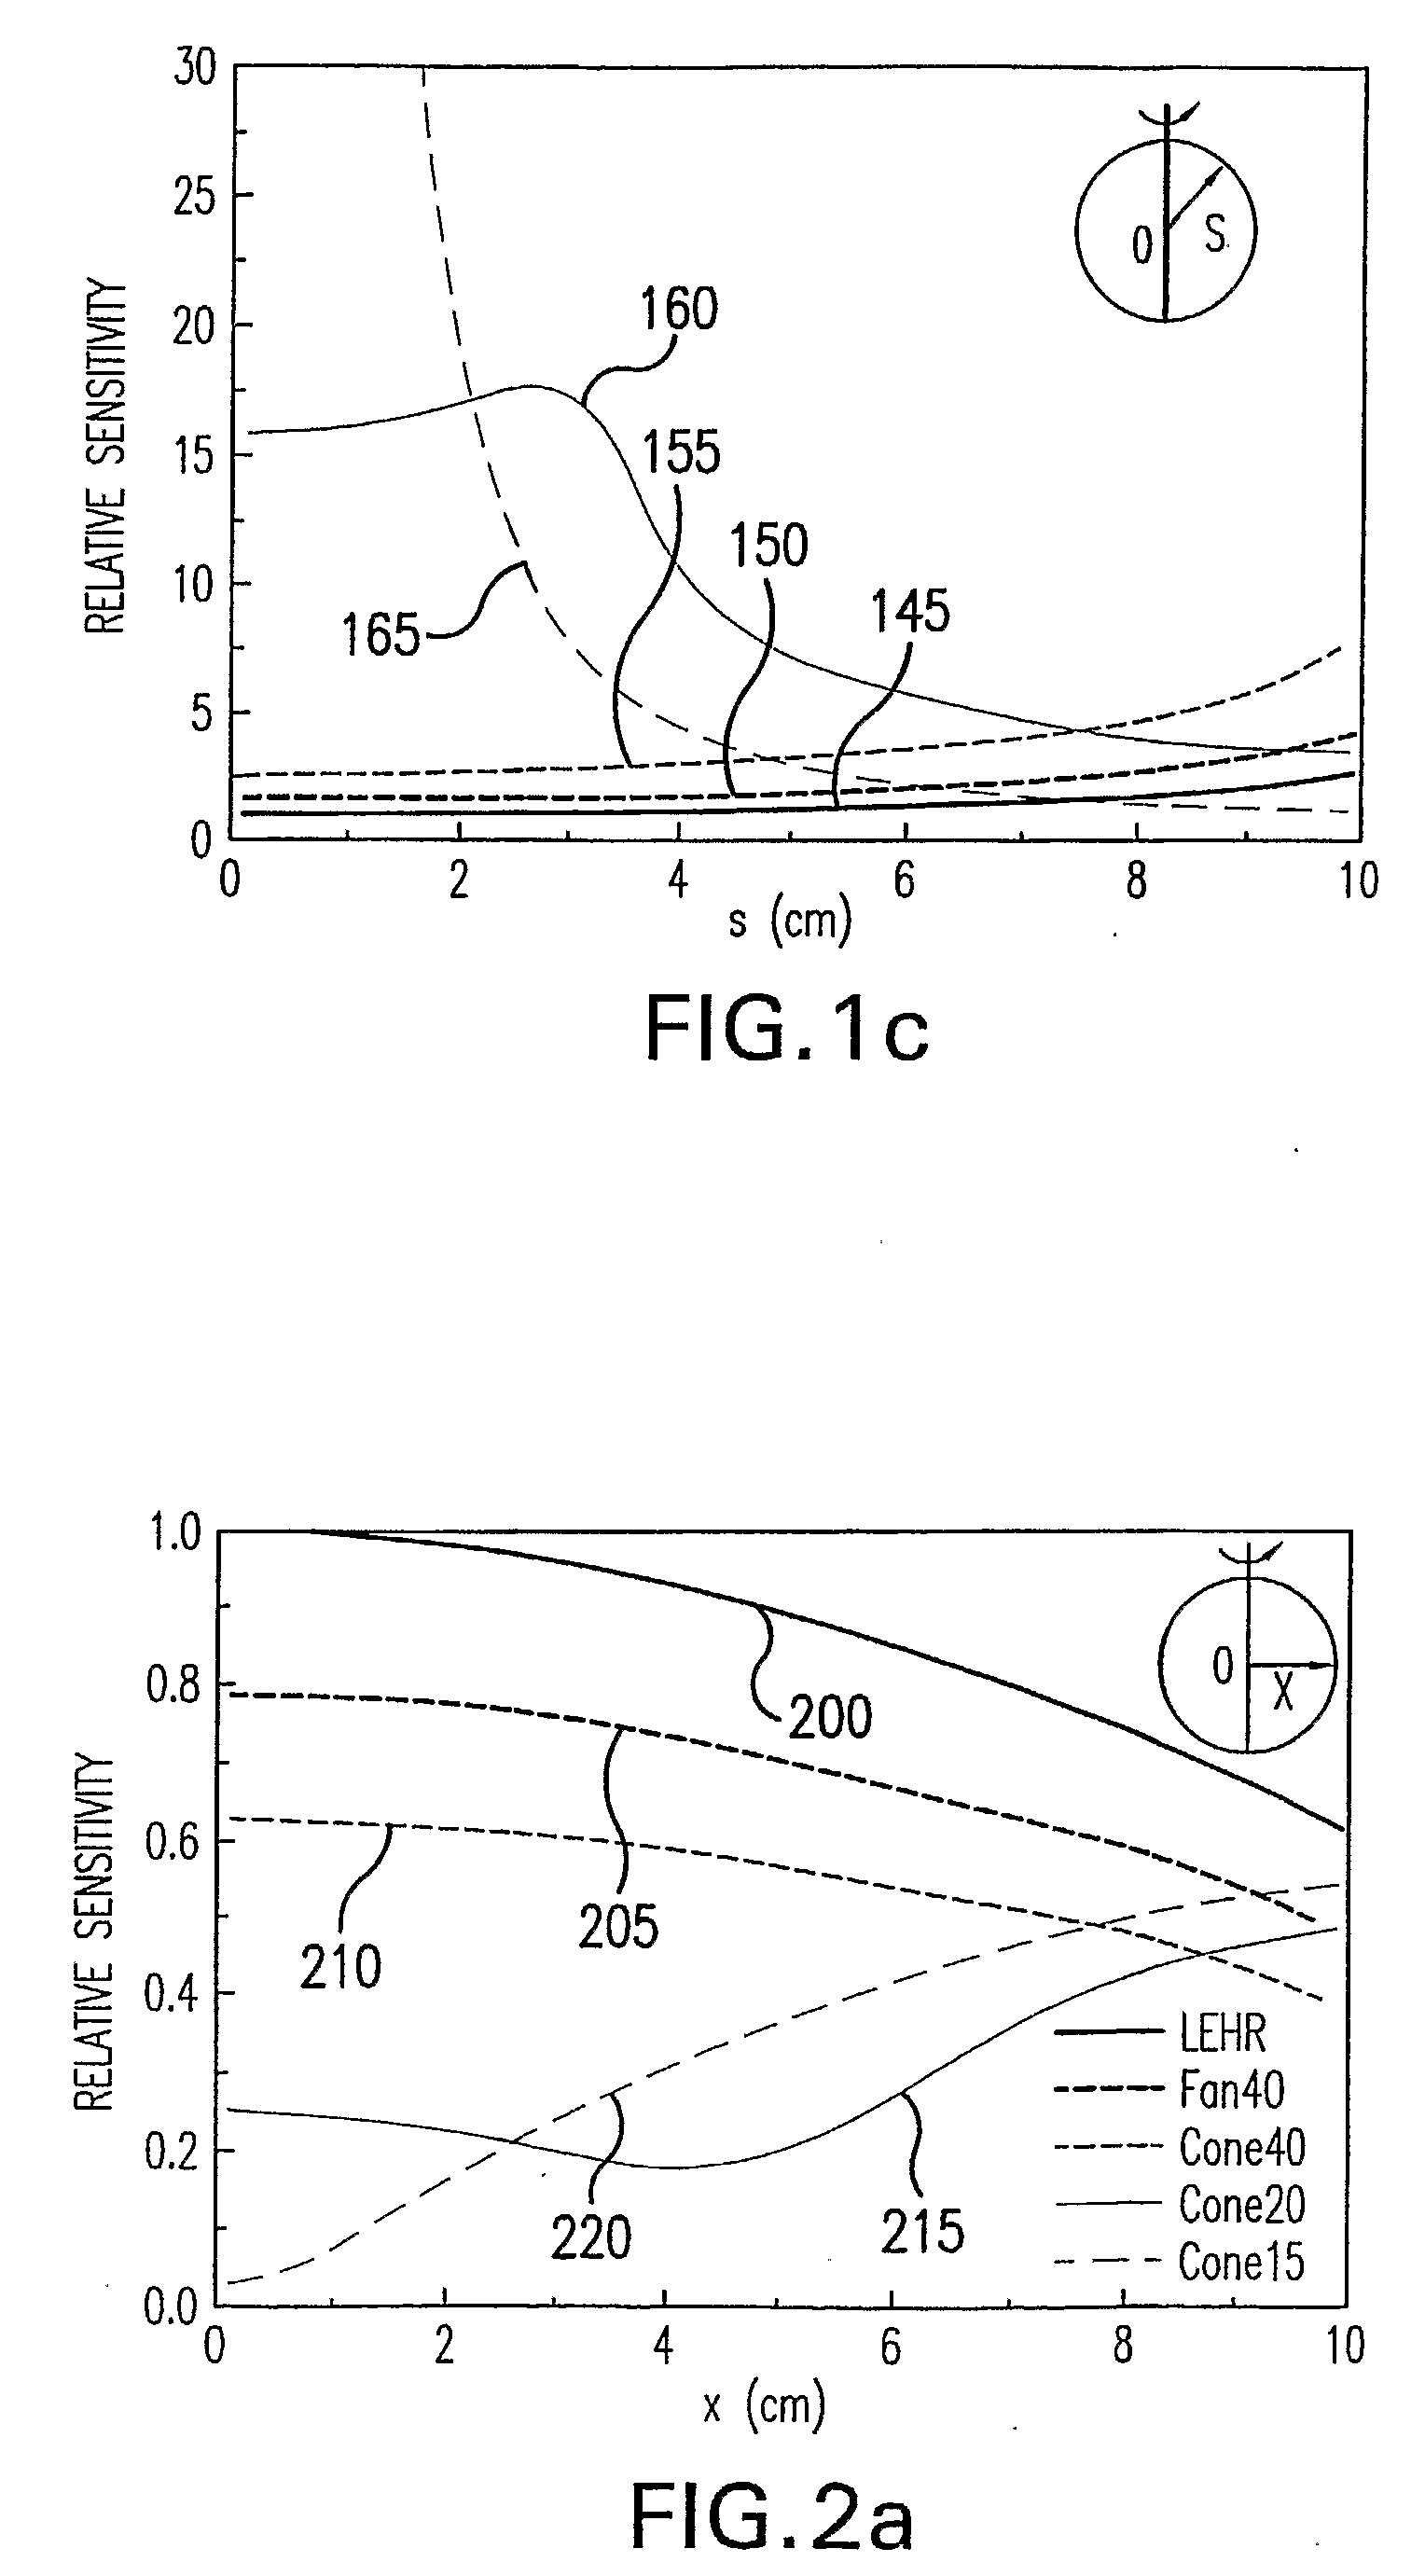 System and Method for Performing Single Photon Emission Computed Tomography (Spect) with a Focal-Length Cone-Beam Collimation